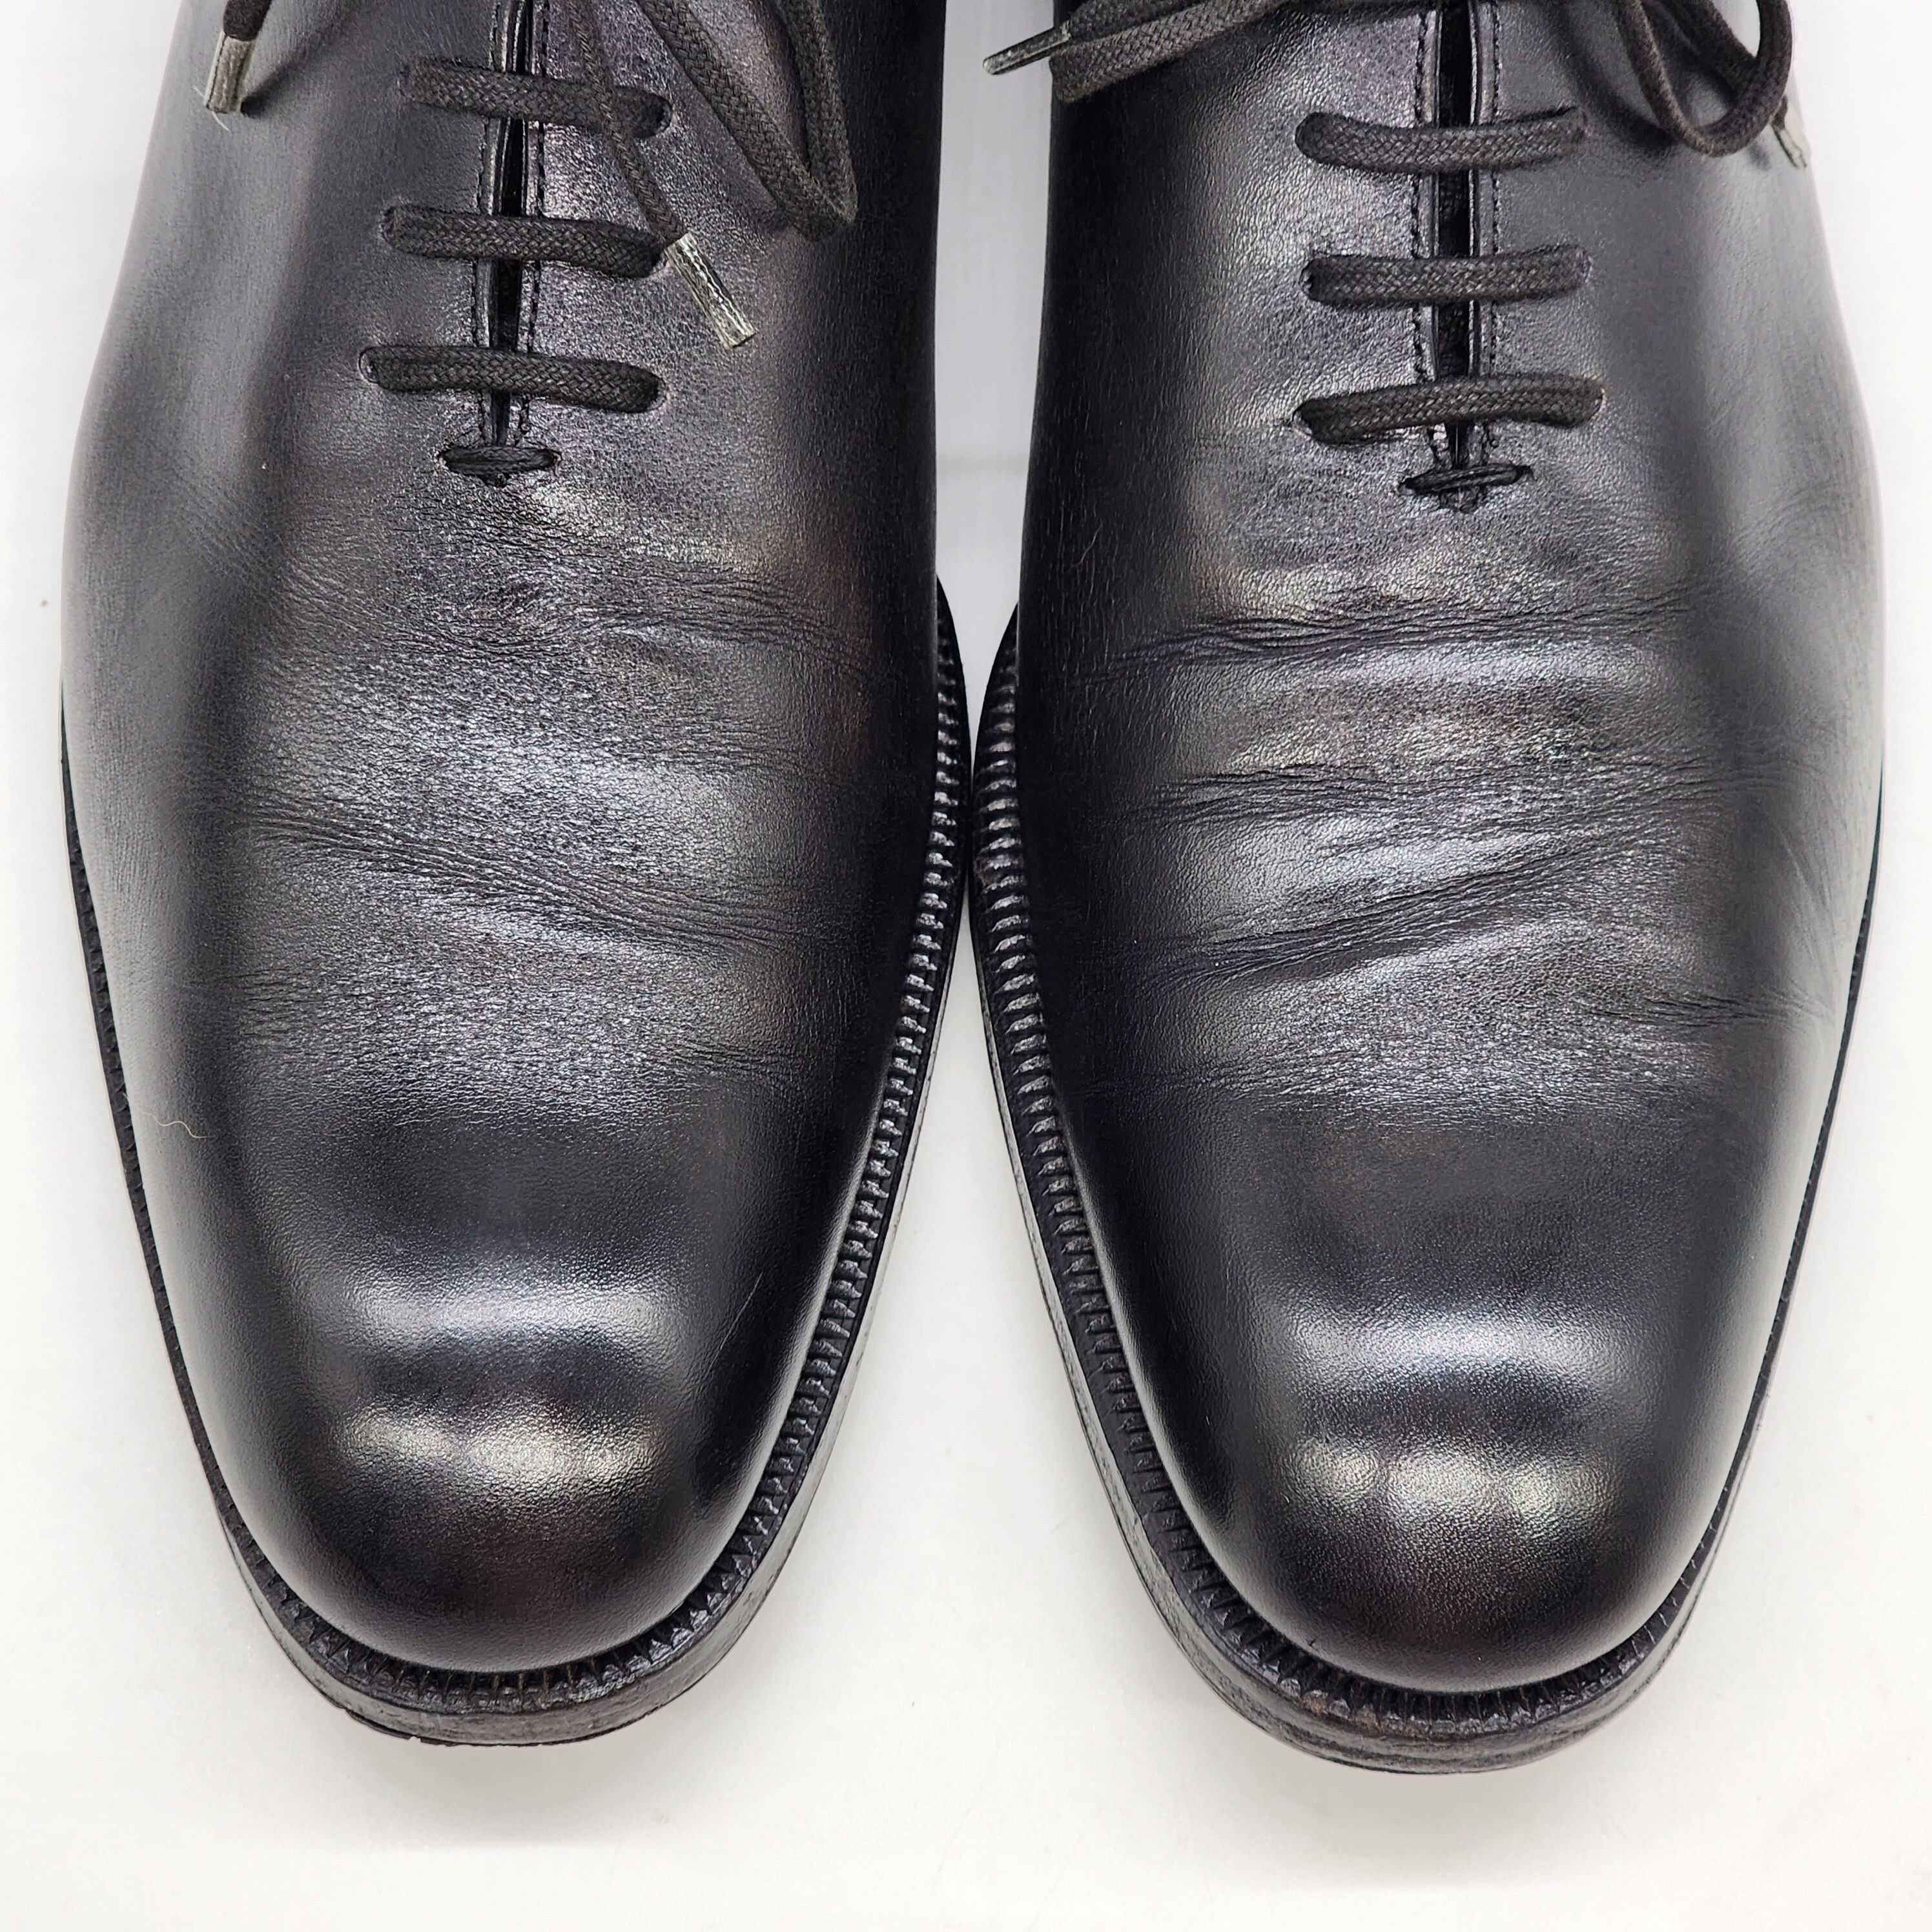 Tom Ford - Elkan Black Leather Whole-cut Oxford Shoes - 4